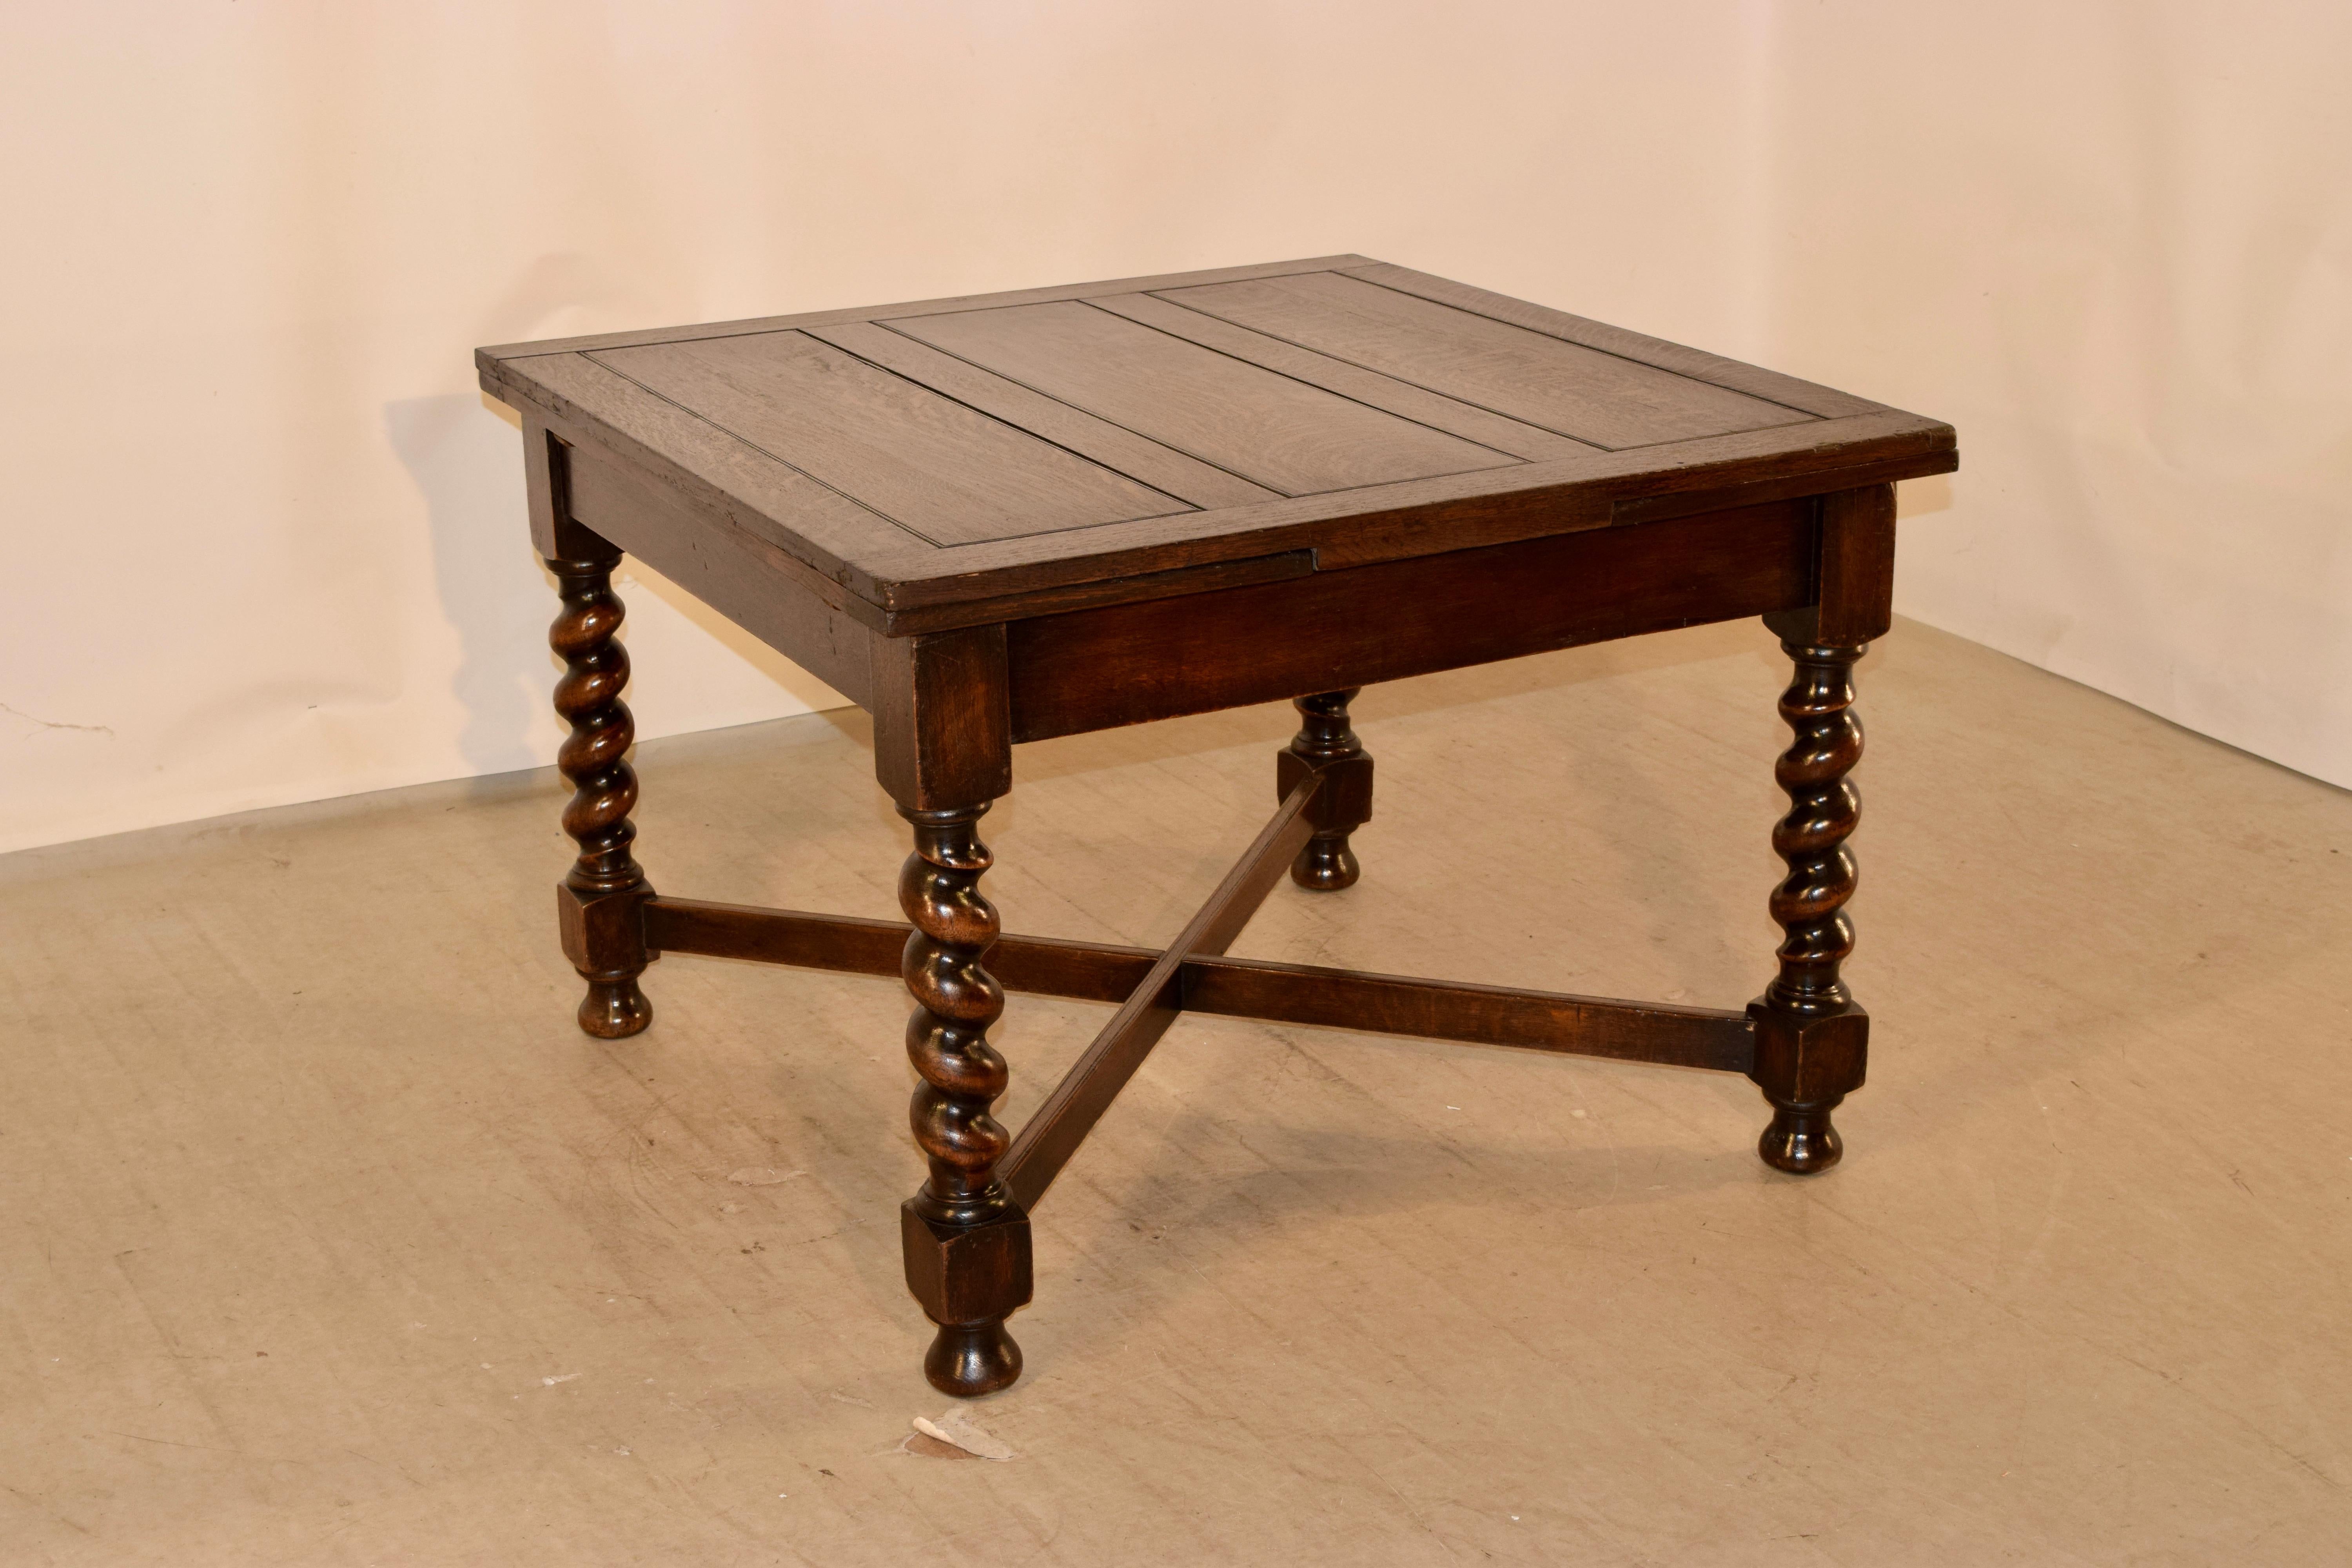 English oak table with two draw-leaves circa 1900. The table has a nicely paneled top and leaves over a simple apron and supported on hand-turned barley twist legs, which are joined by simple cross stretchers and raised on hand-turned bun feet. The